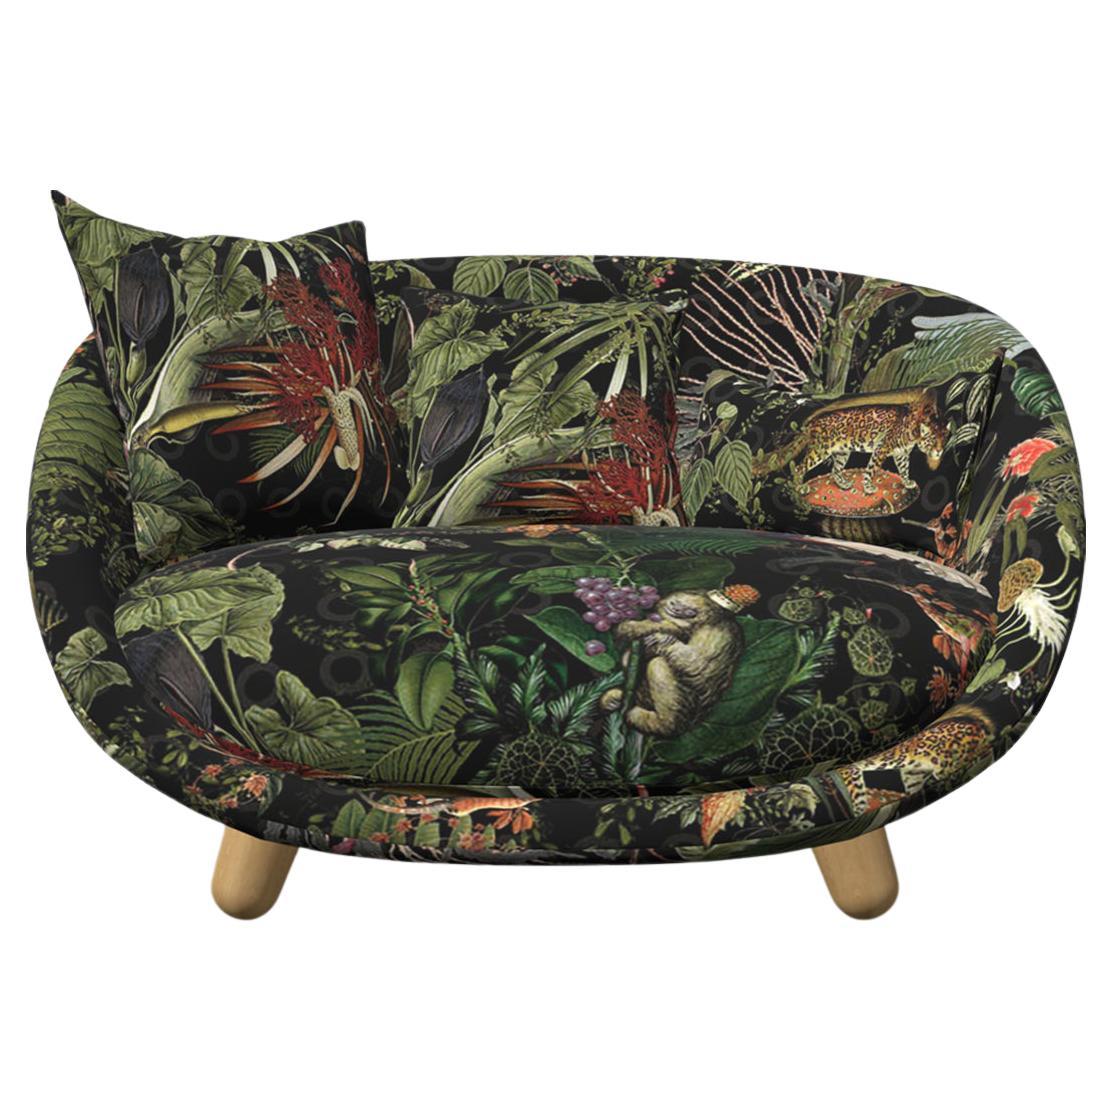 Moooi Love Sofa in The Menagerie of Extinct Animals Upholstery & White Wash Legs For Sale